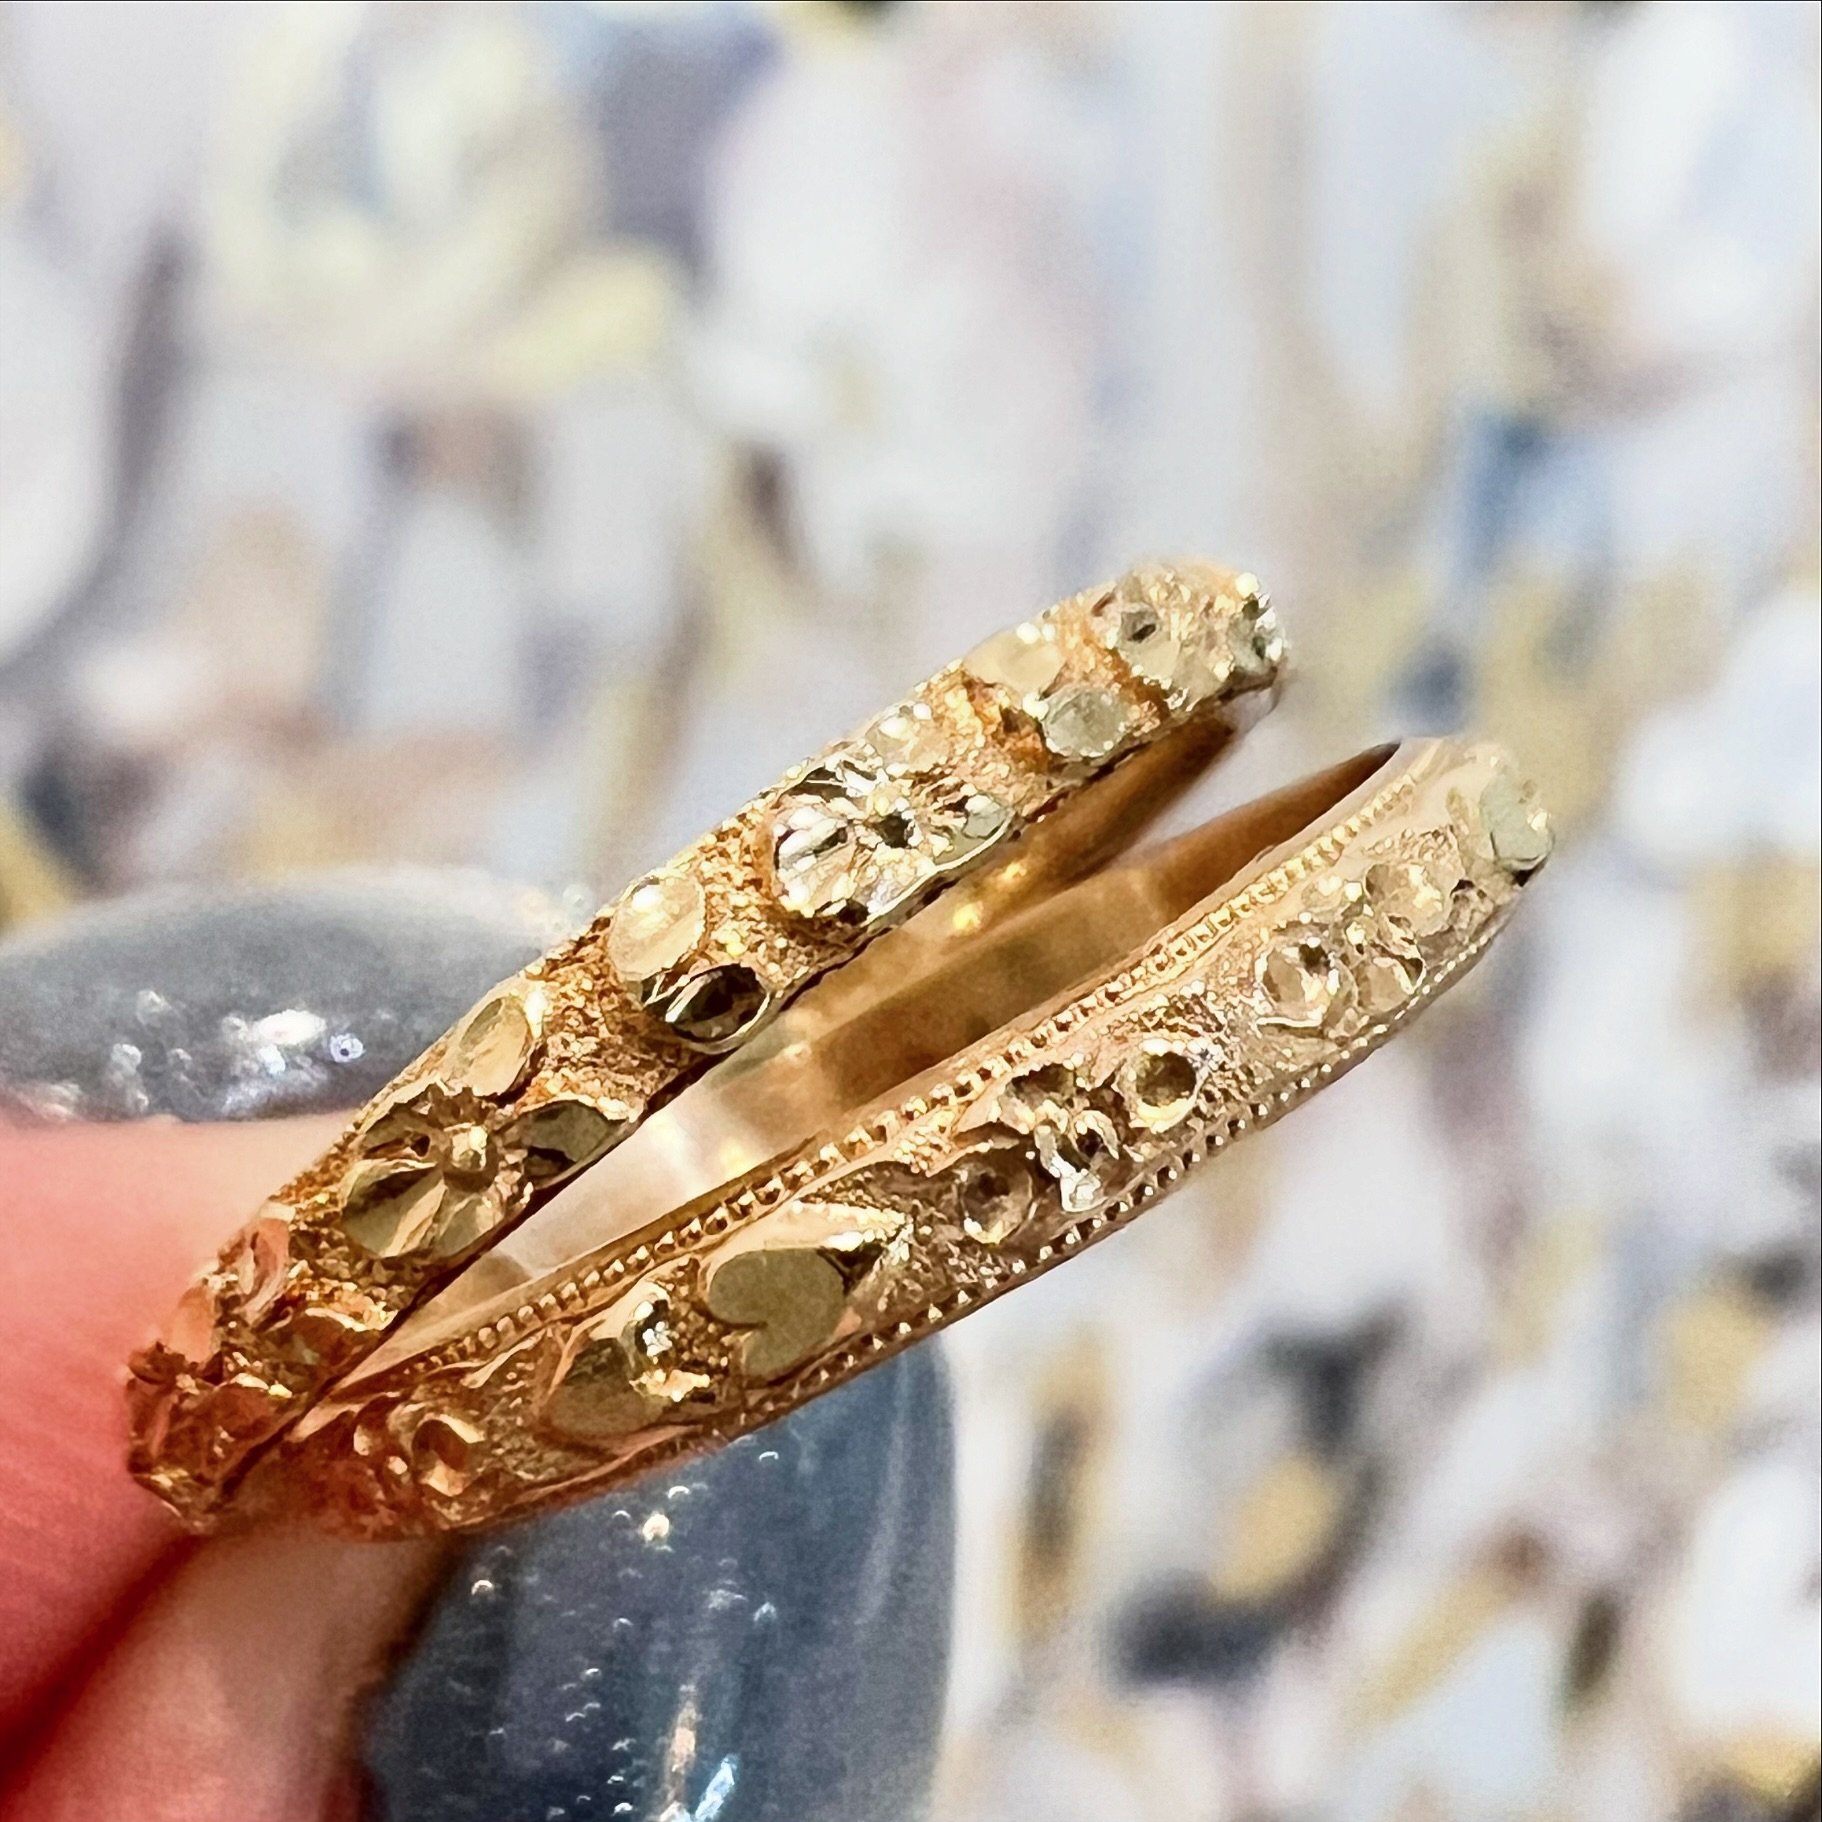 It&rsquo;s all in the details 🤩

Our antique wedding bands are truly one of a kind. From florals and hearts, to crosses and custom initial engravings, our collection has a wide variety of design details. Antique wedding bands start at $800. 

Stop i